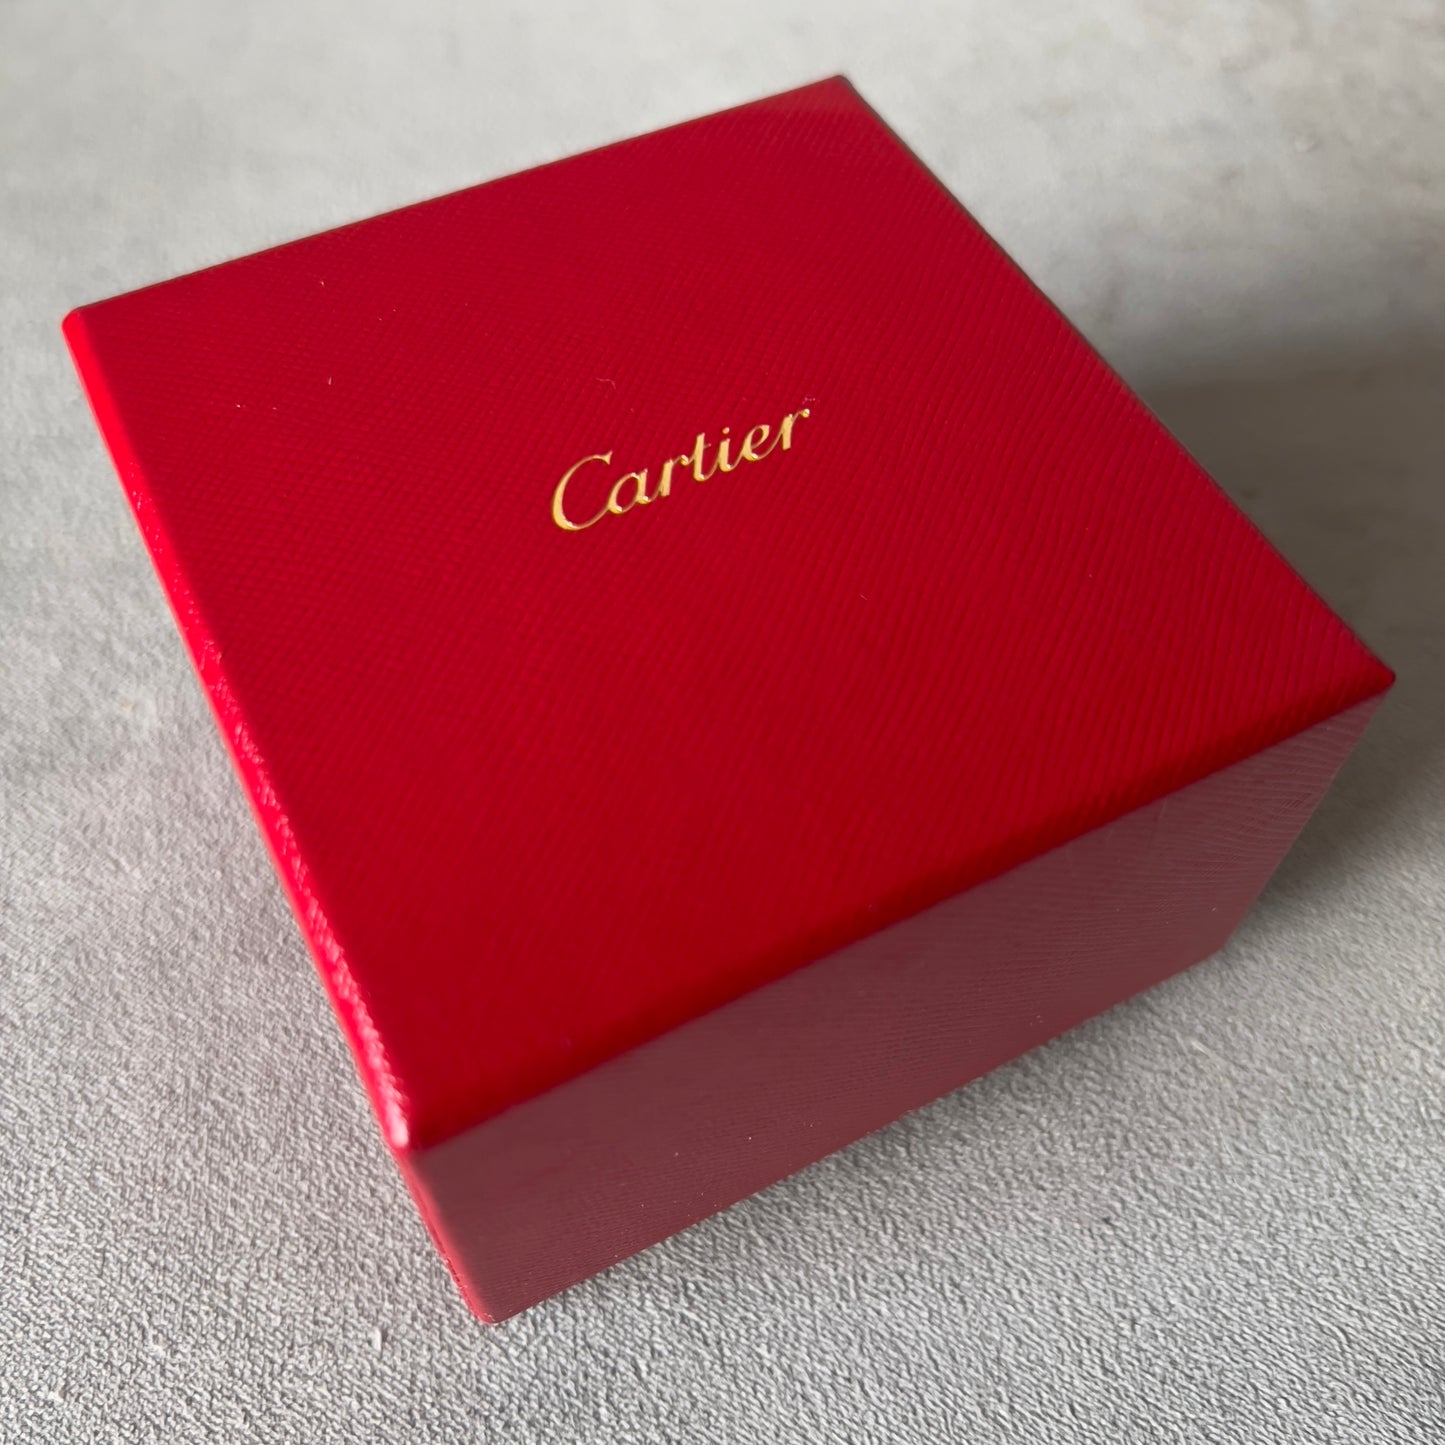 CARTIER Trinity Ring Box + Outer Box 3.5x3.30x2.40 inches + Booklet